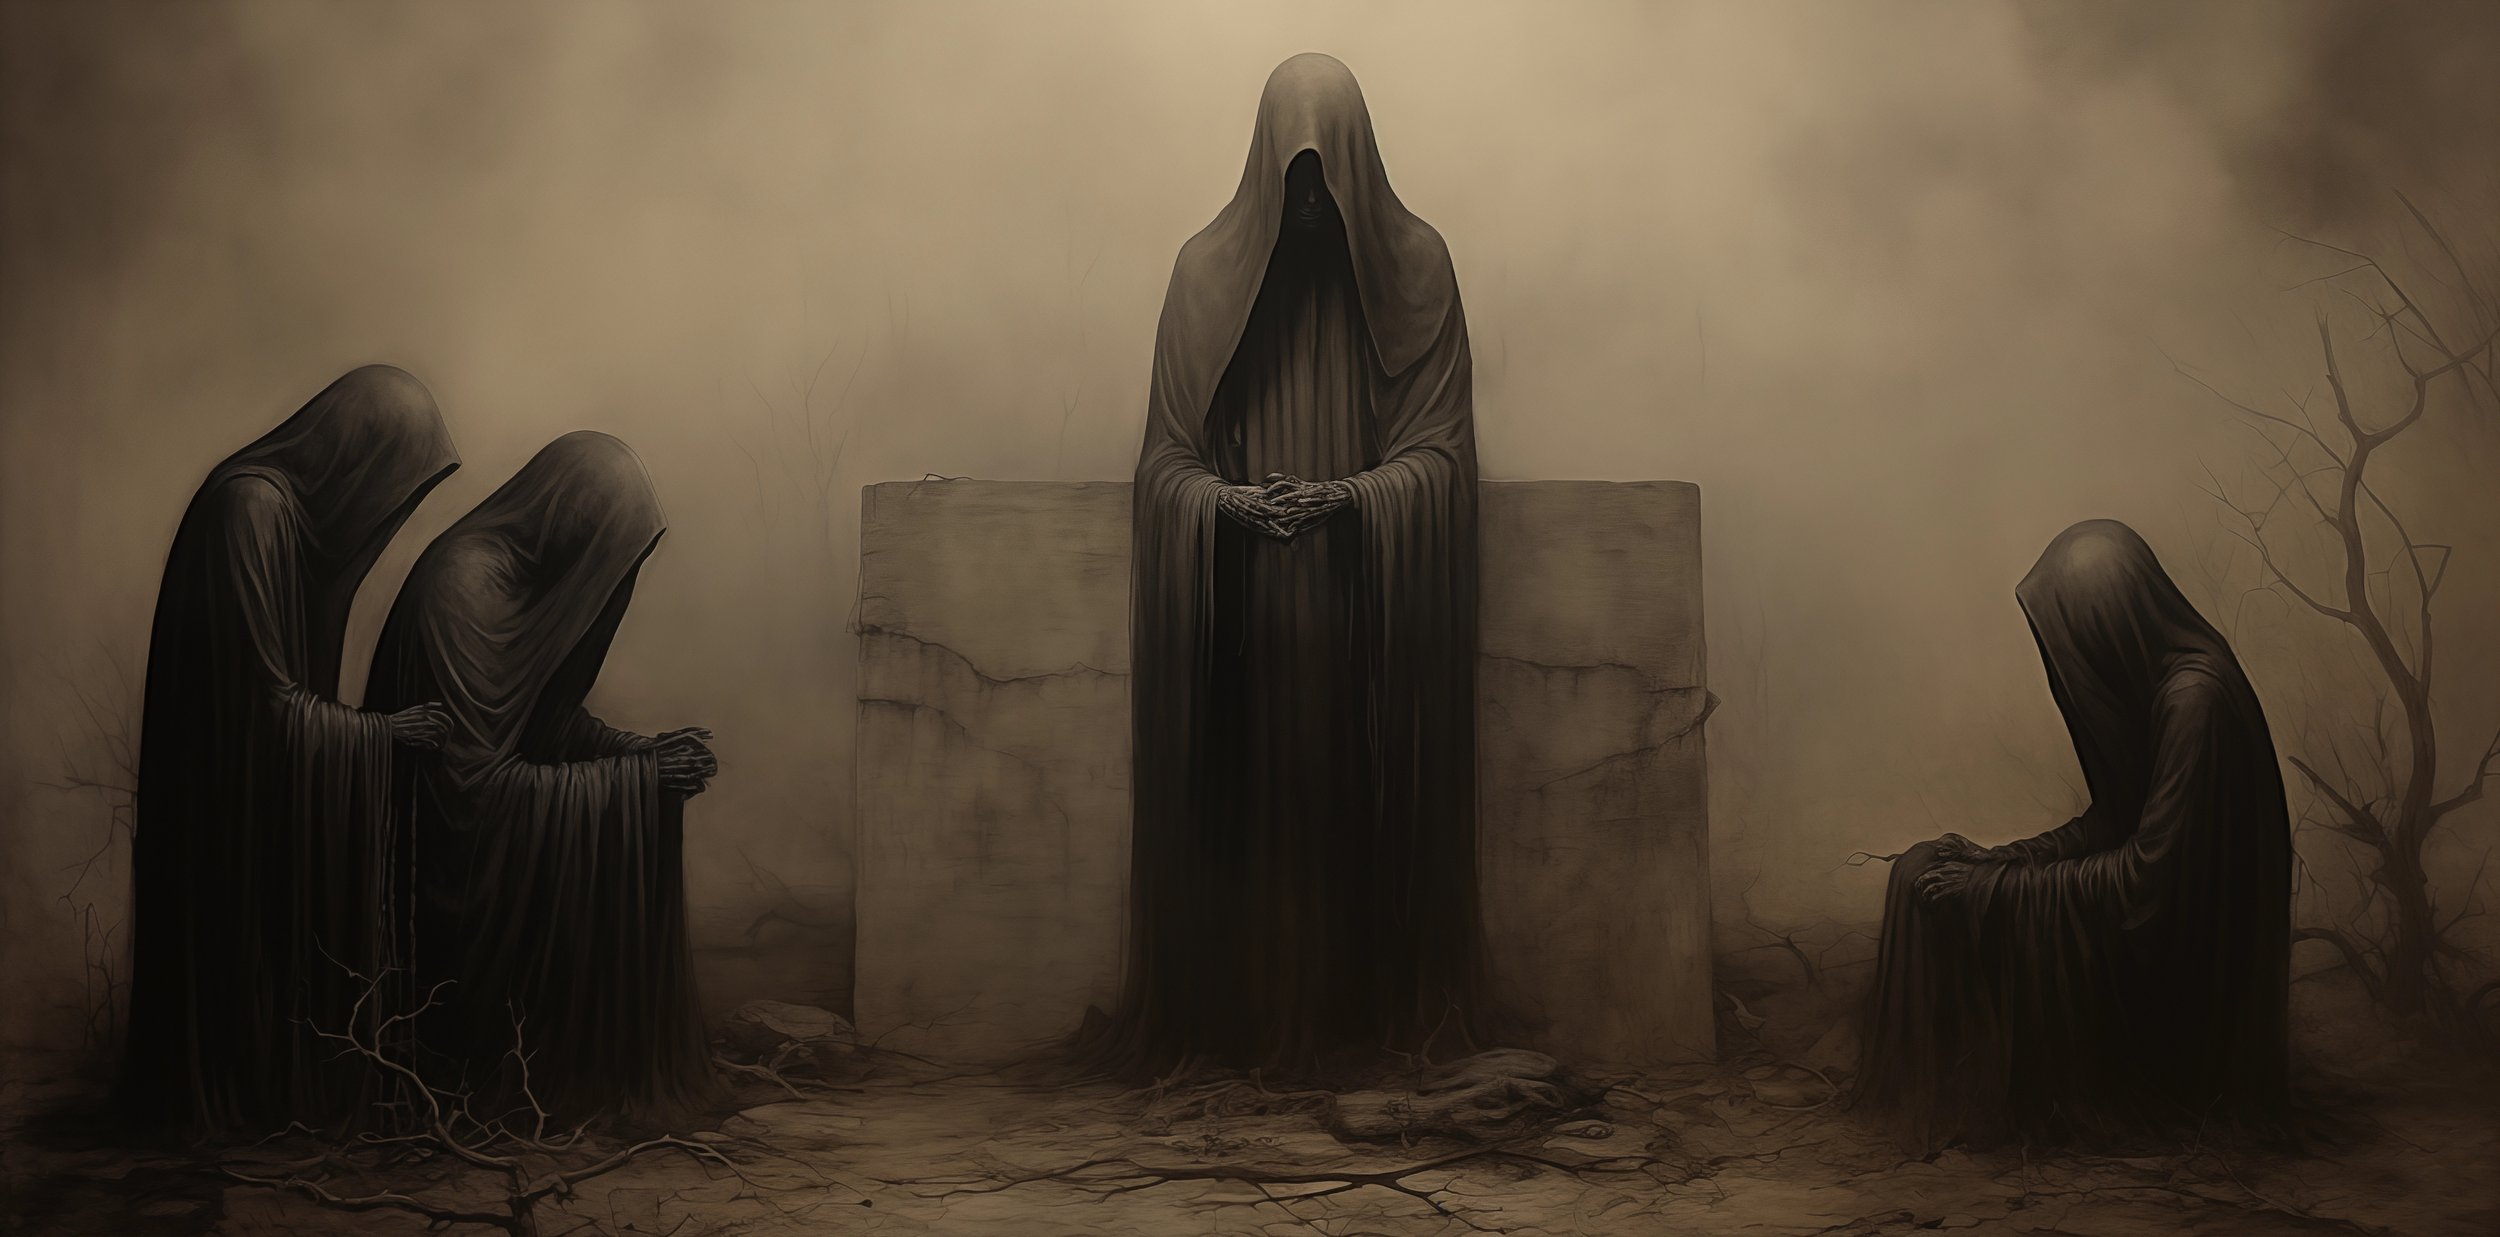 The Mourners' Pact